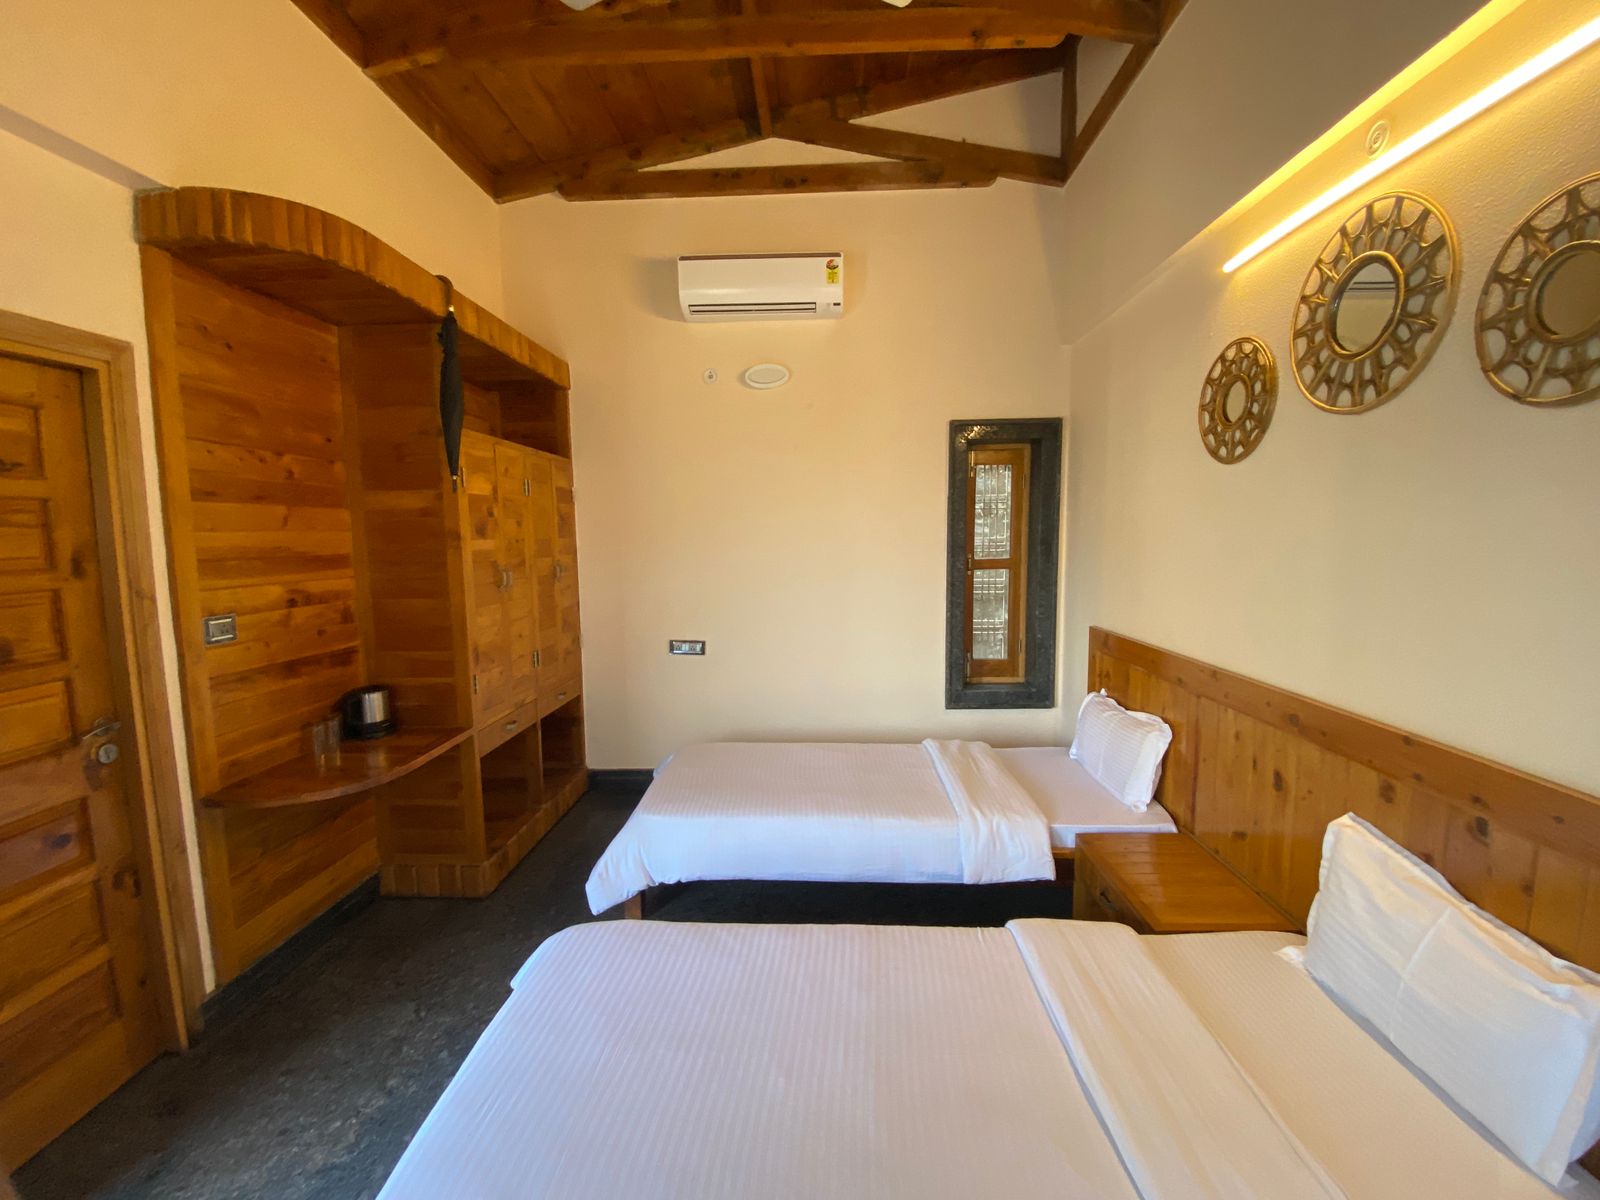 Rishikesh Yogpeeth offers affordable private room accommodations for students attending 200 Hour Yoga Teacher Training in India. 